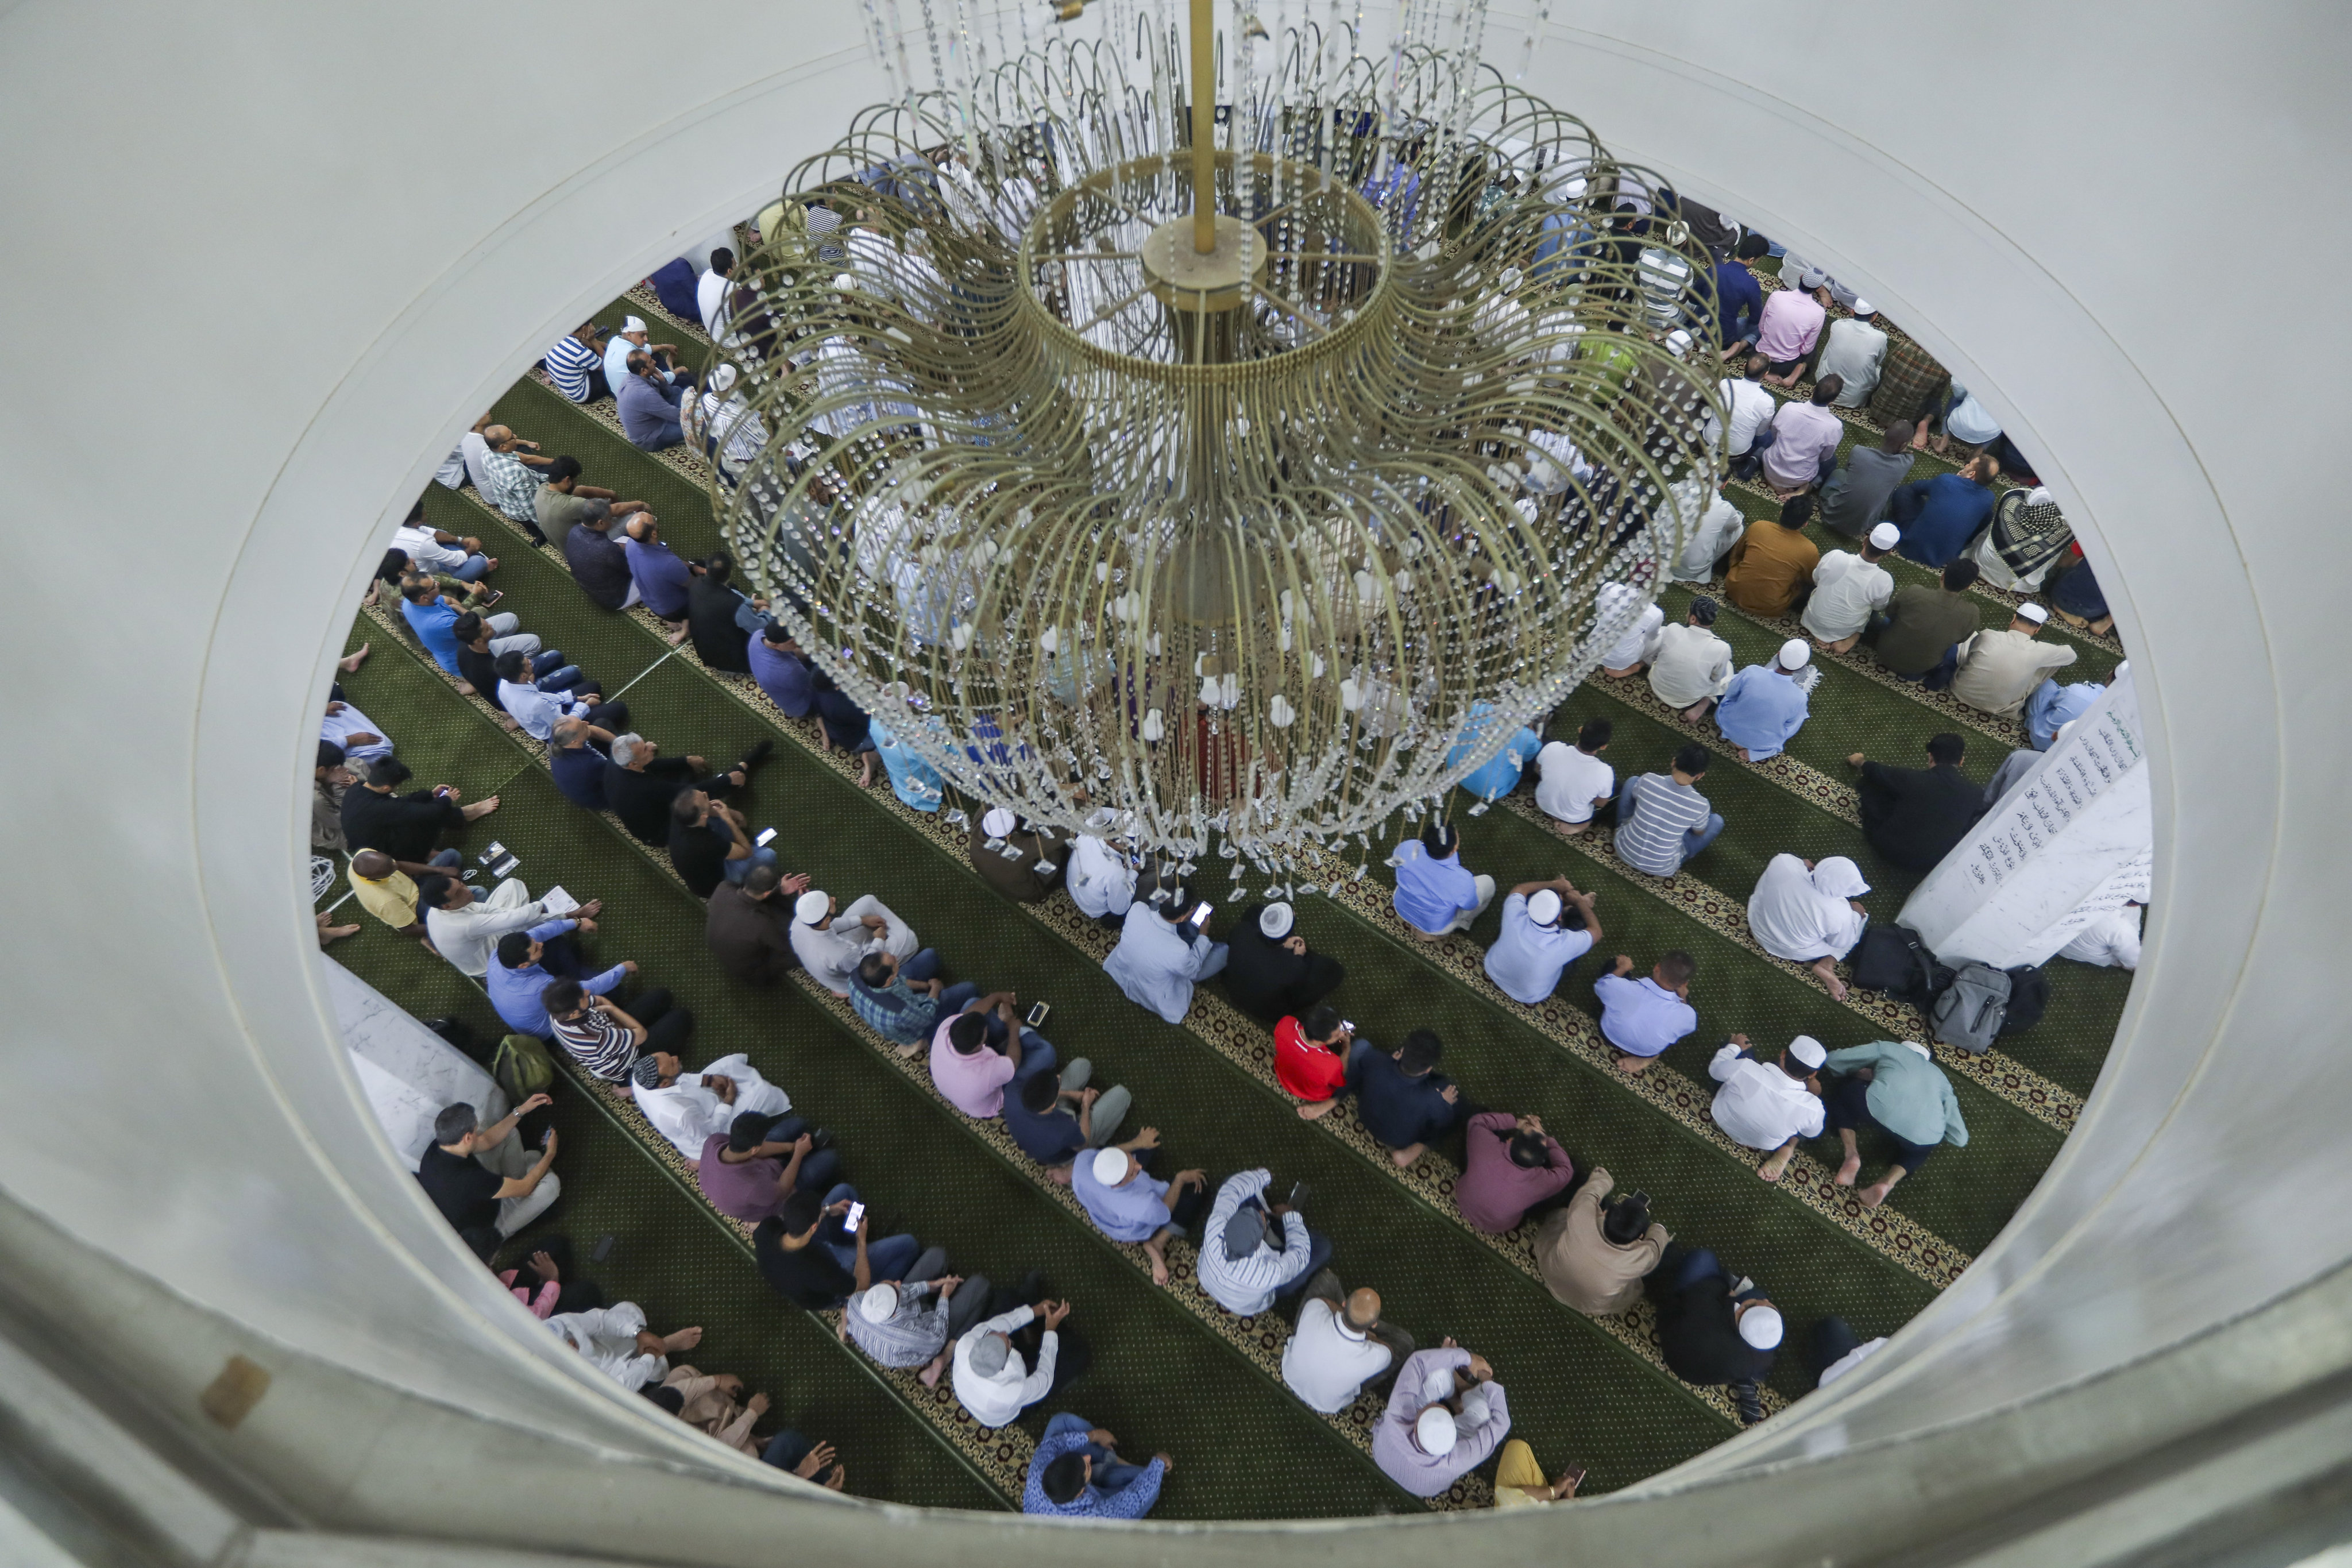 Muslims pray during Ramadan at Kowloon Mosque in Tsim Sha Tsui. According to the Tourism Board, 105 eateries across the city have been deemed halal certified premises. Photo: Xiaomei Chen